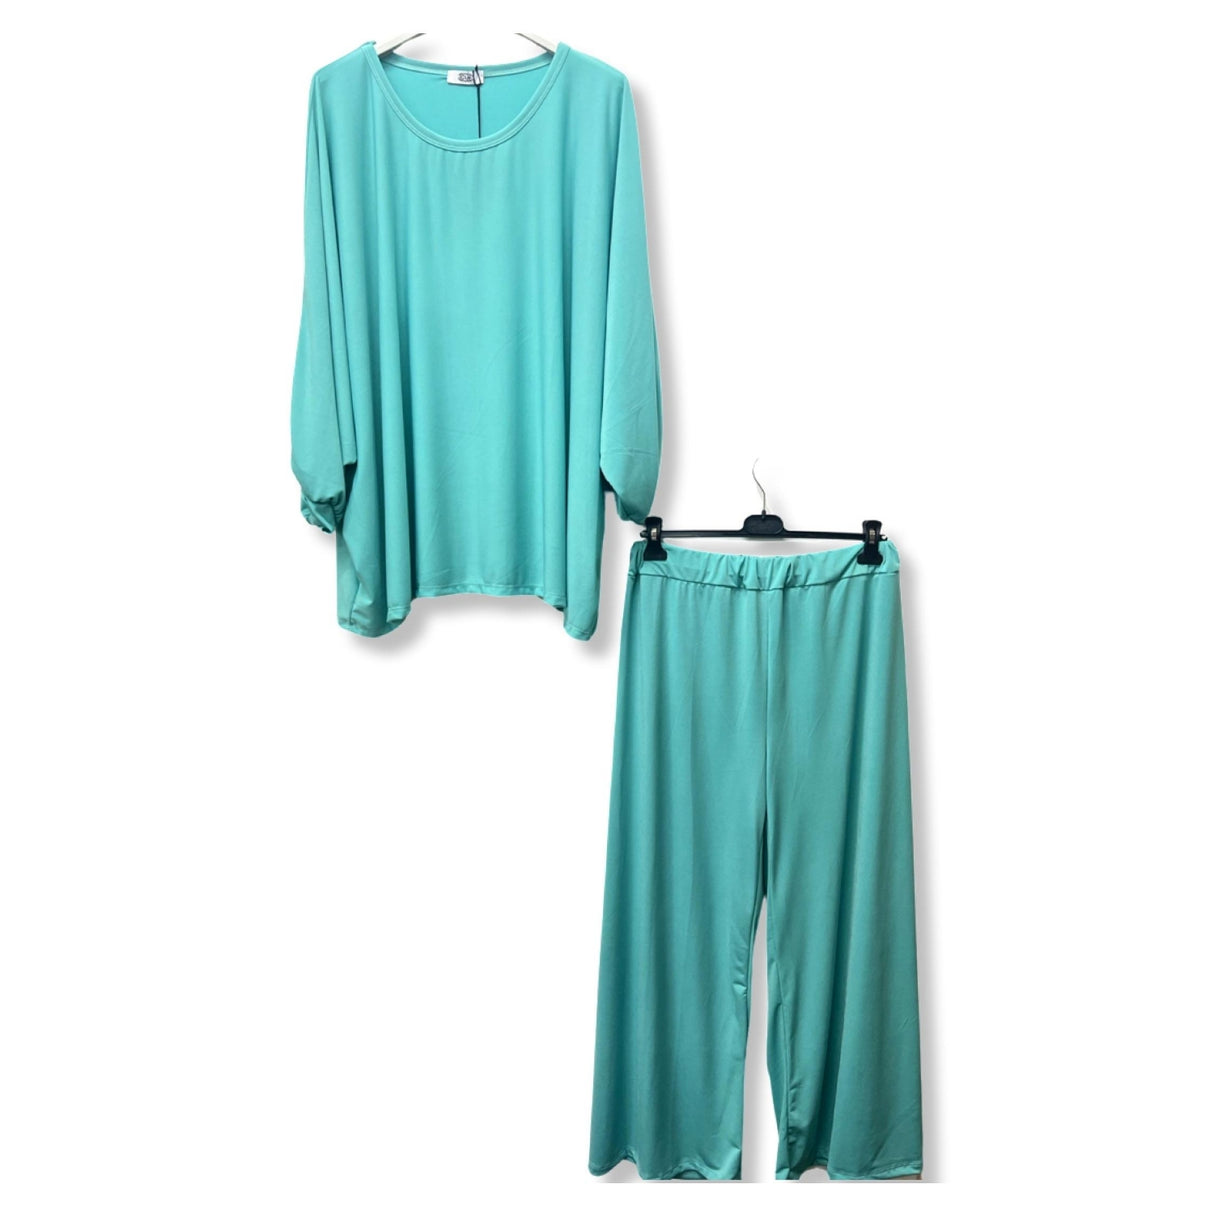 SPRING CO-ORD SET COCOON SHAPE TOP & HIGH WAIST WIDE LEG PANTS ONE SIZE FITS ALL UK SIZE 10-24